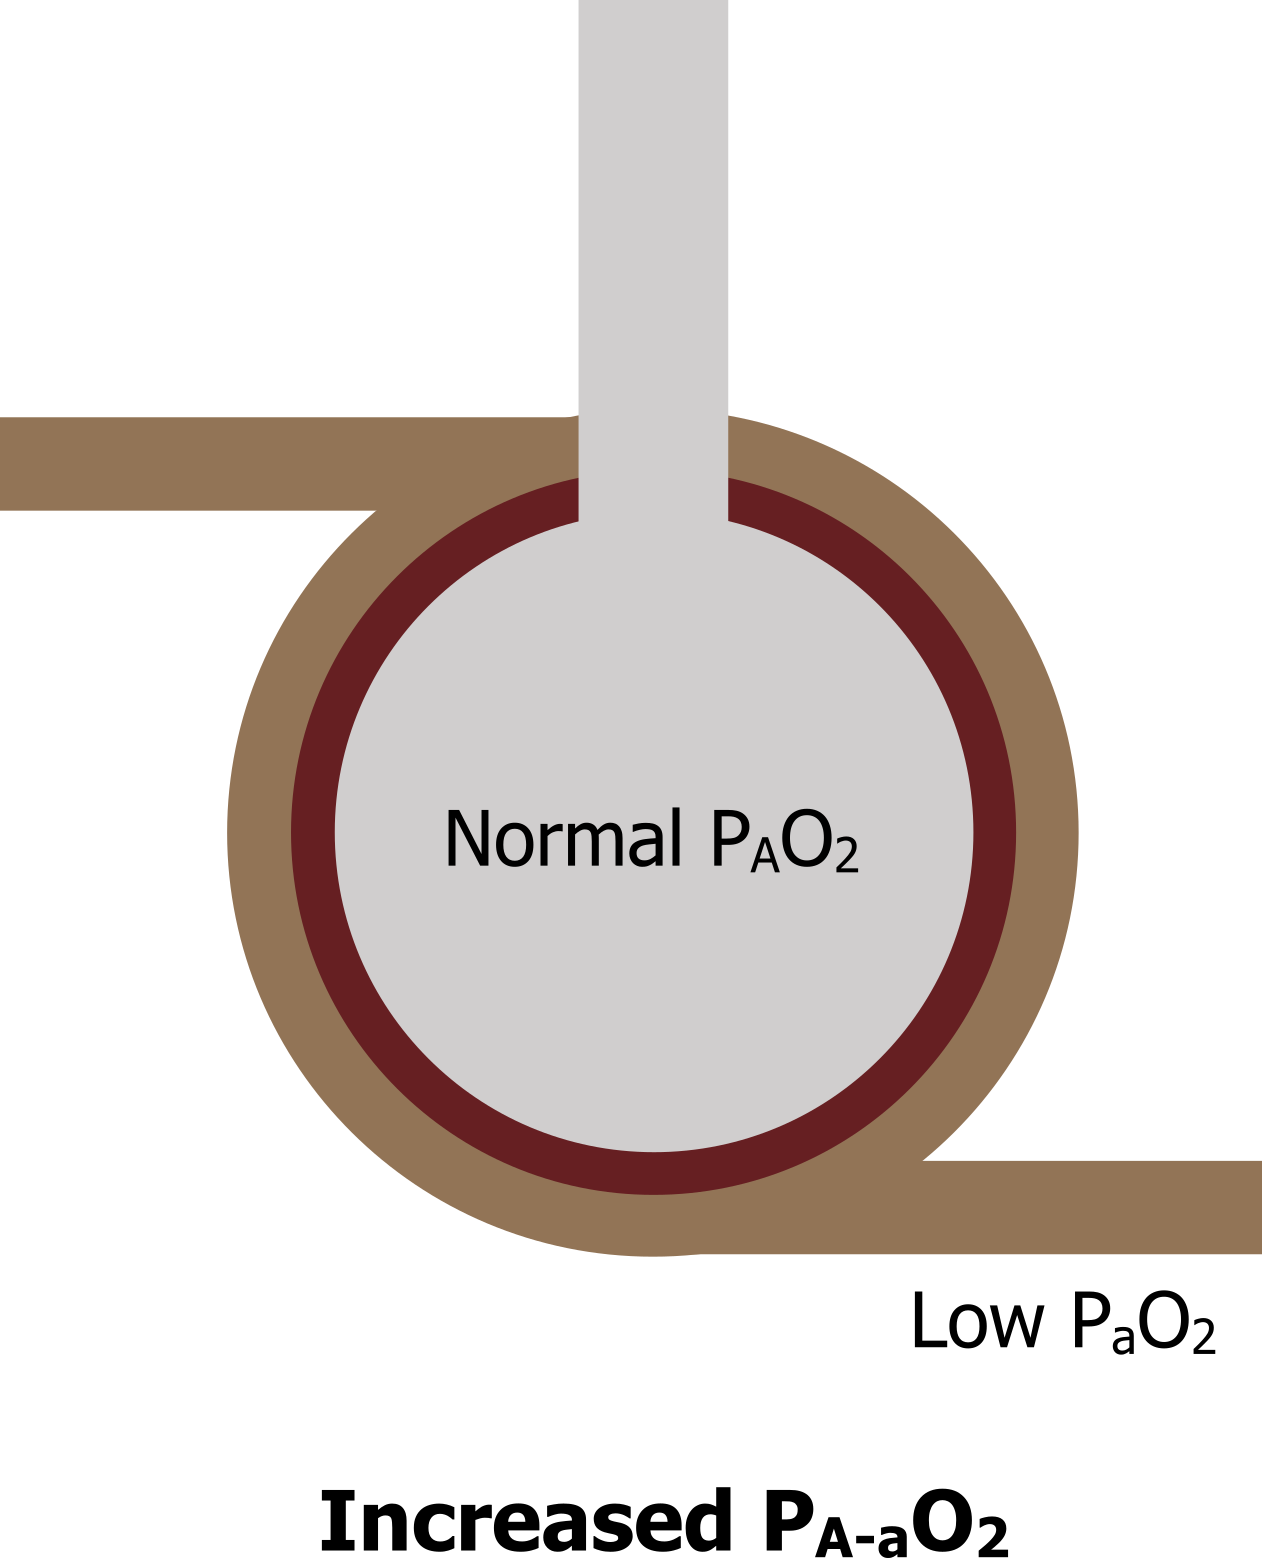 Increased PA-aO2. Alveolus with text Normal PaO2. It is surrounded by an inner dark red circle and an outer blue circle with text Low PaO2